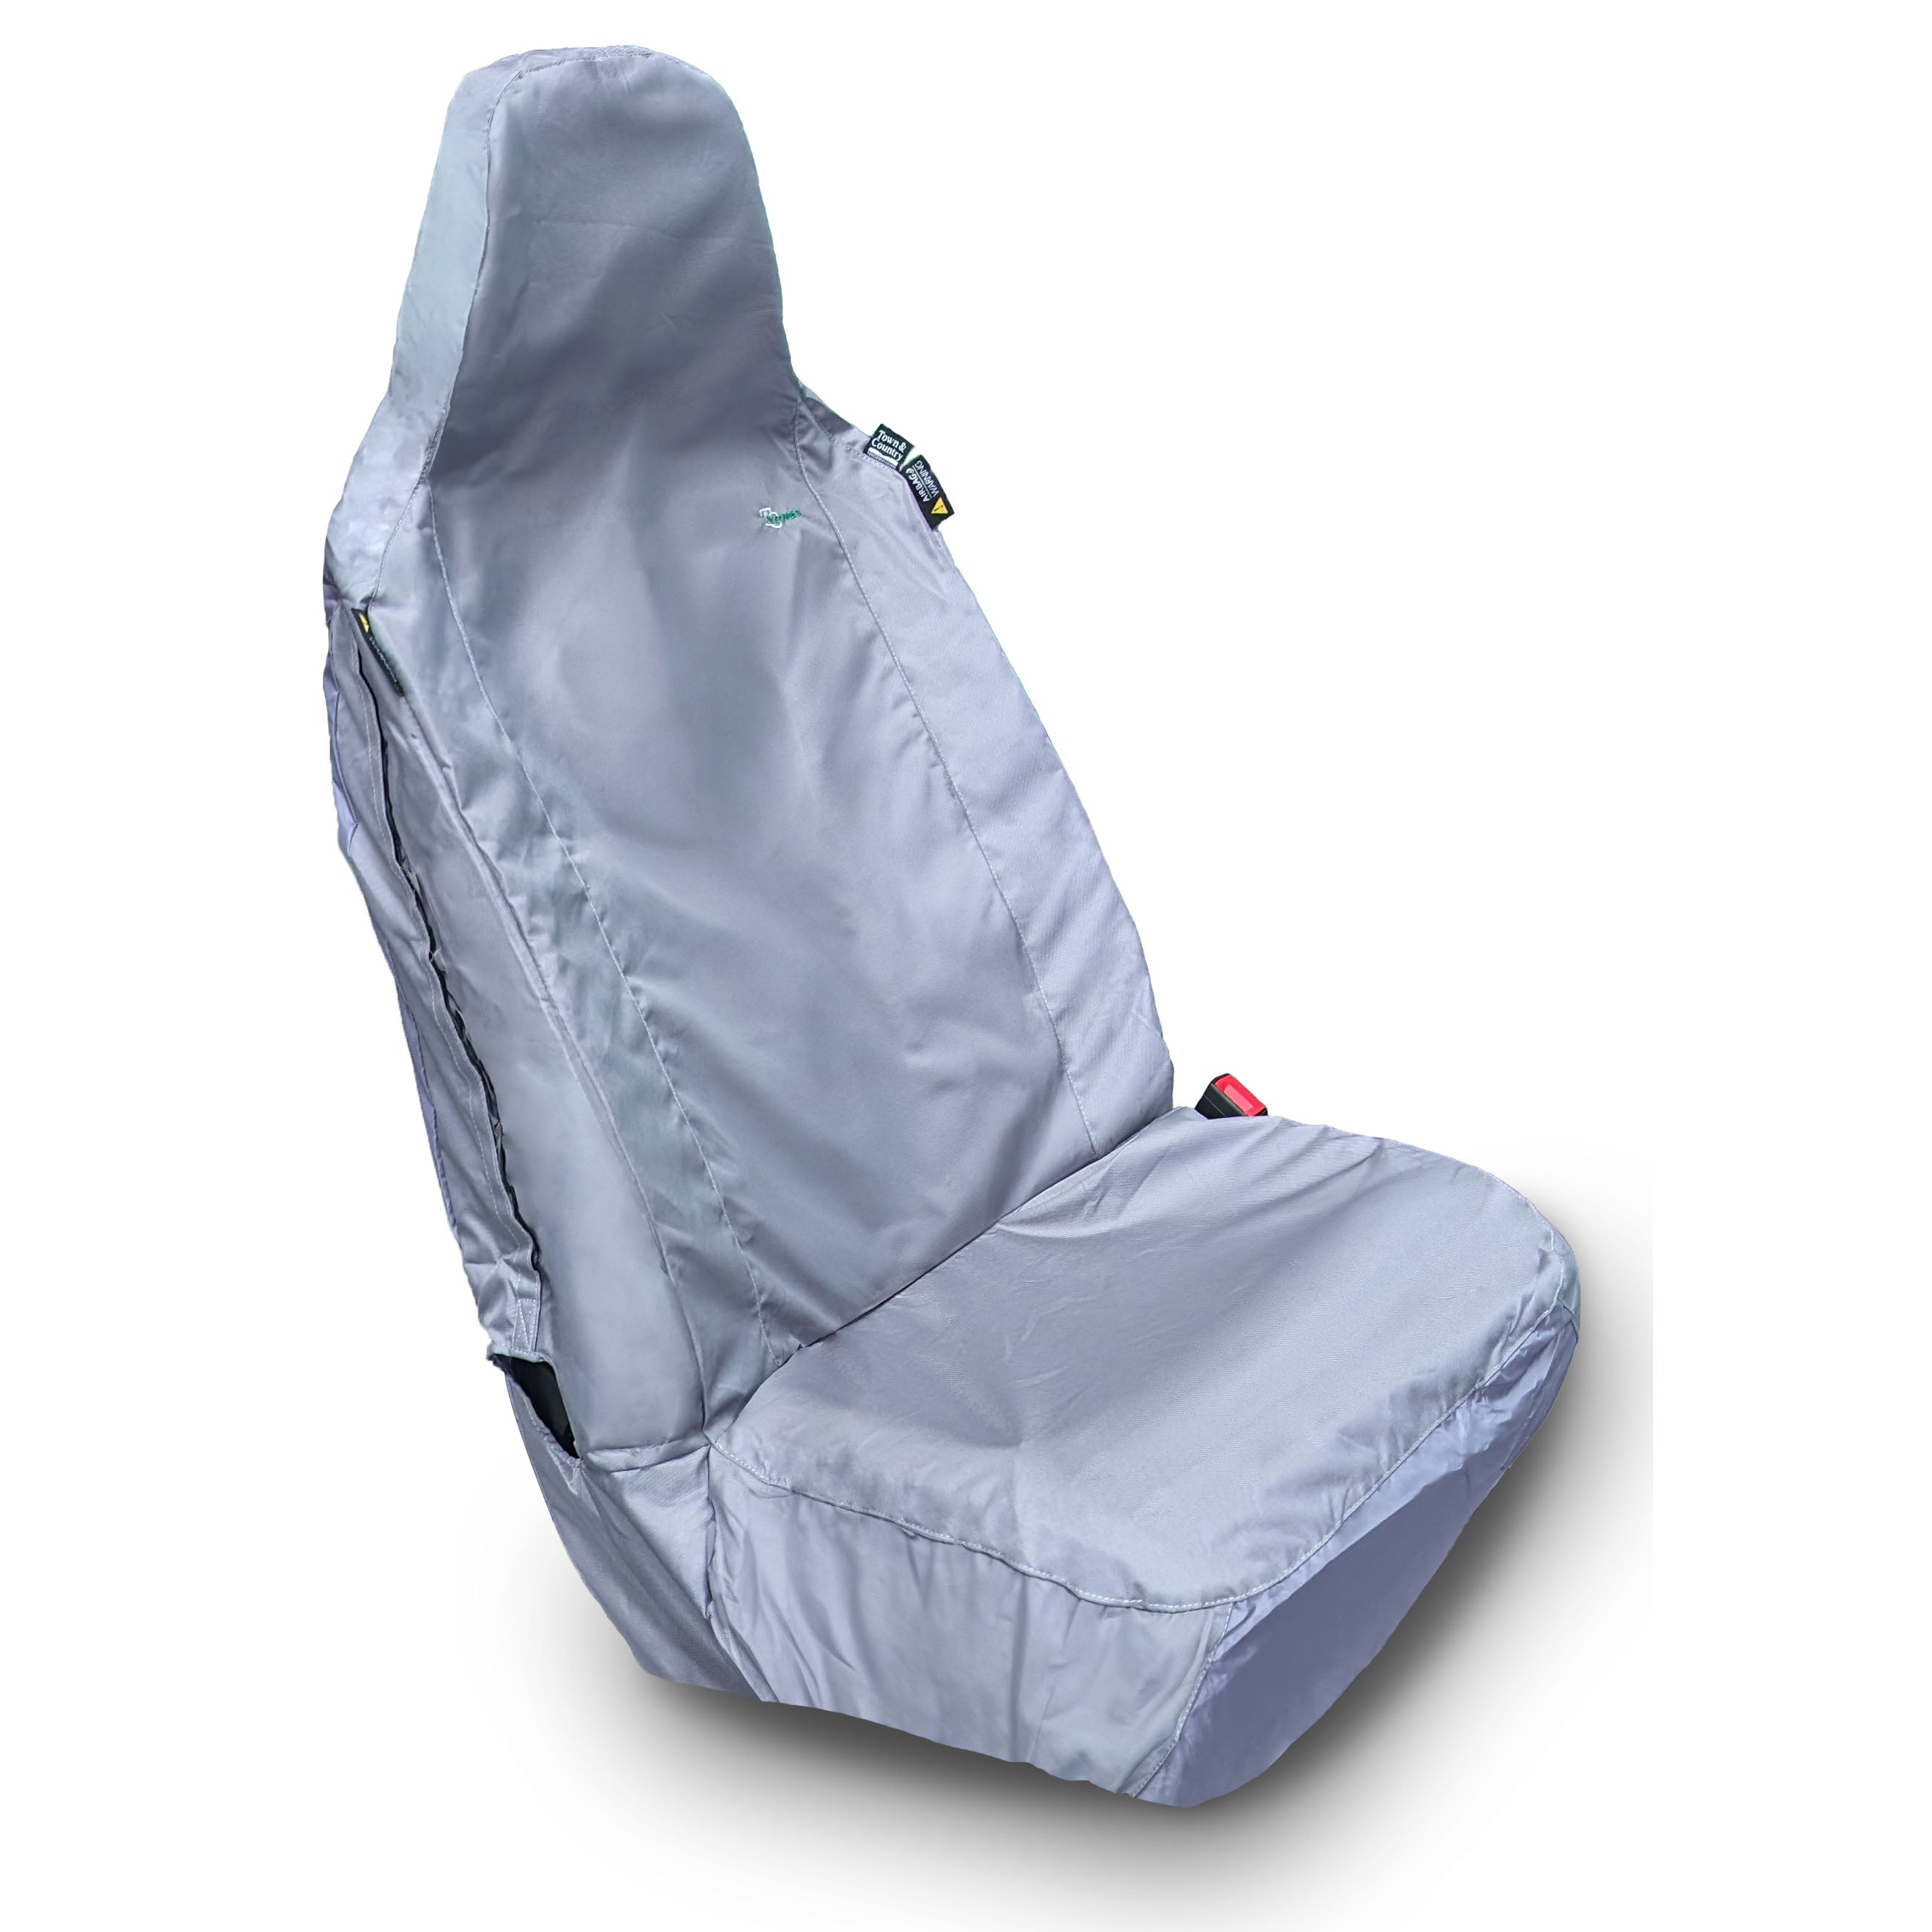 Front Car Seat Cover - Passenger Seat